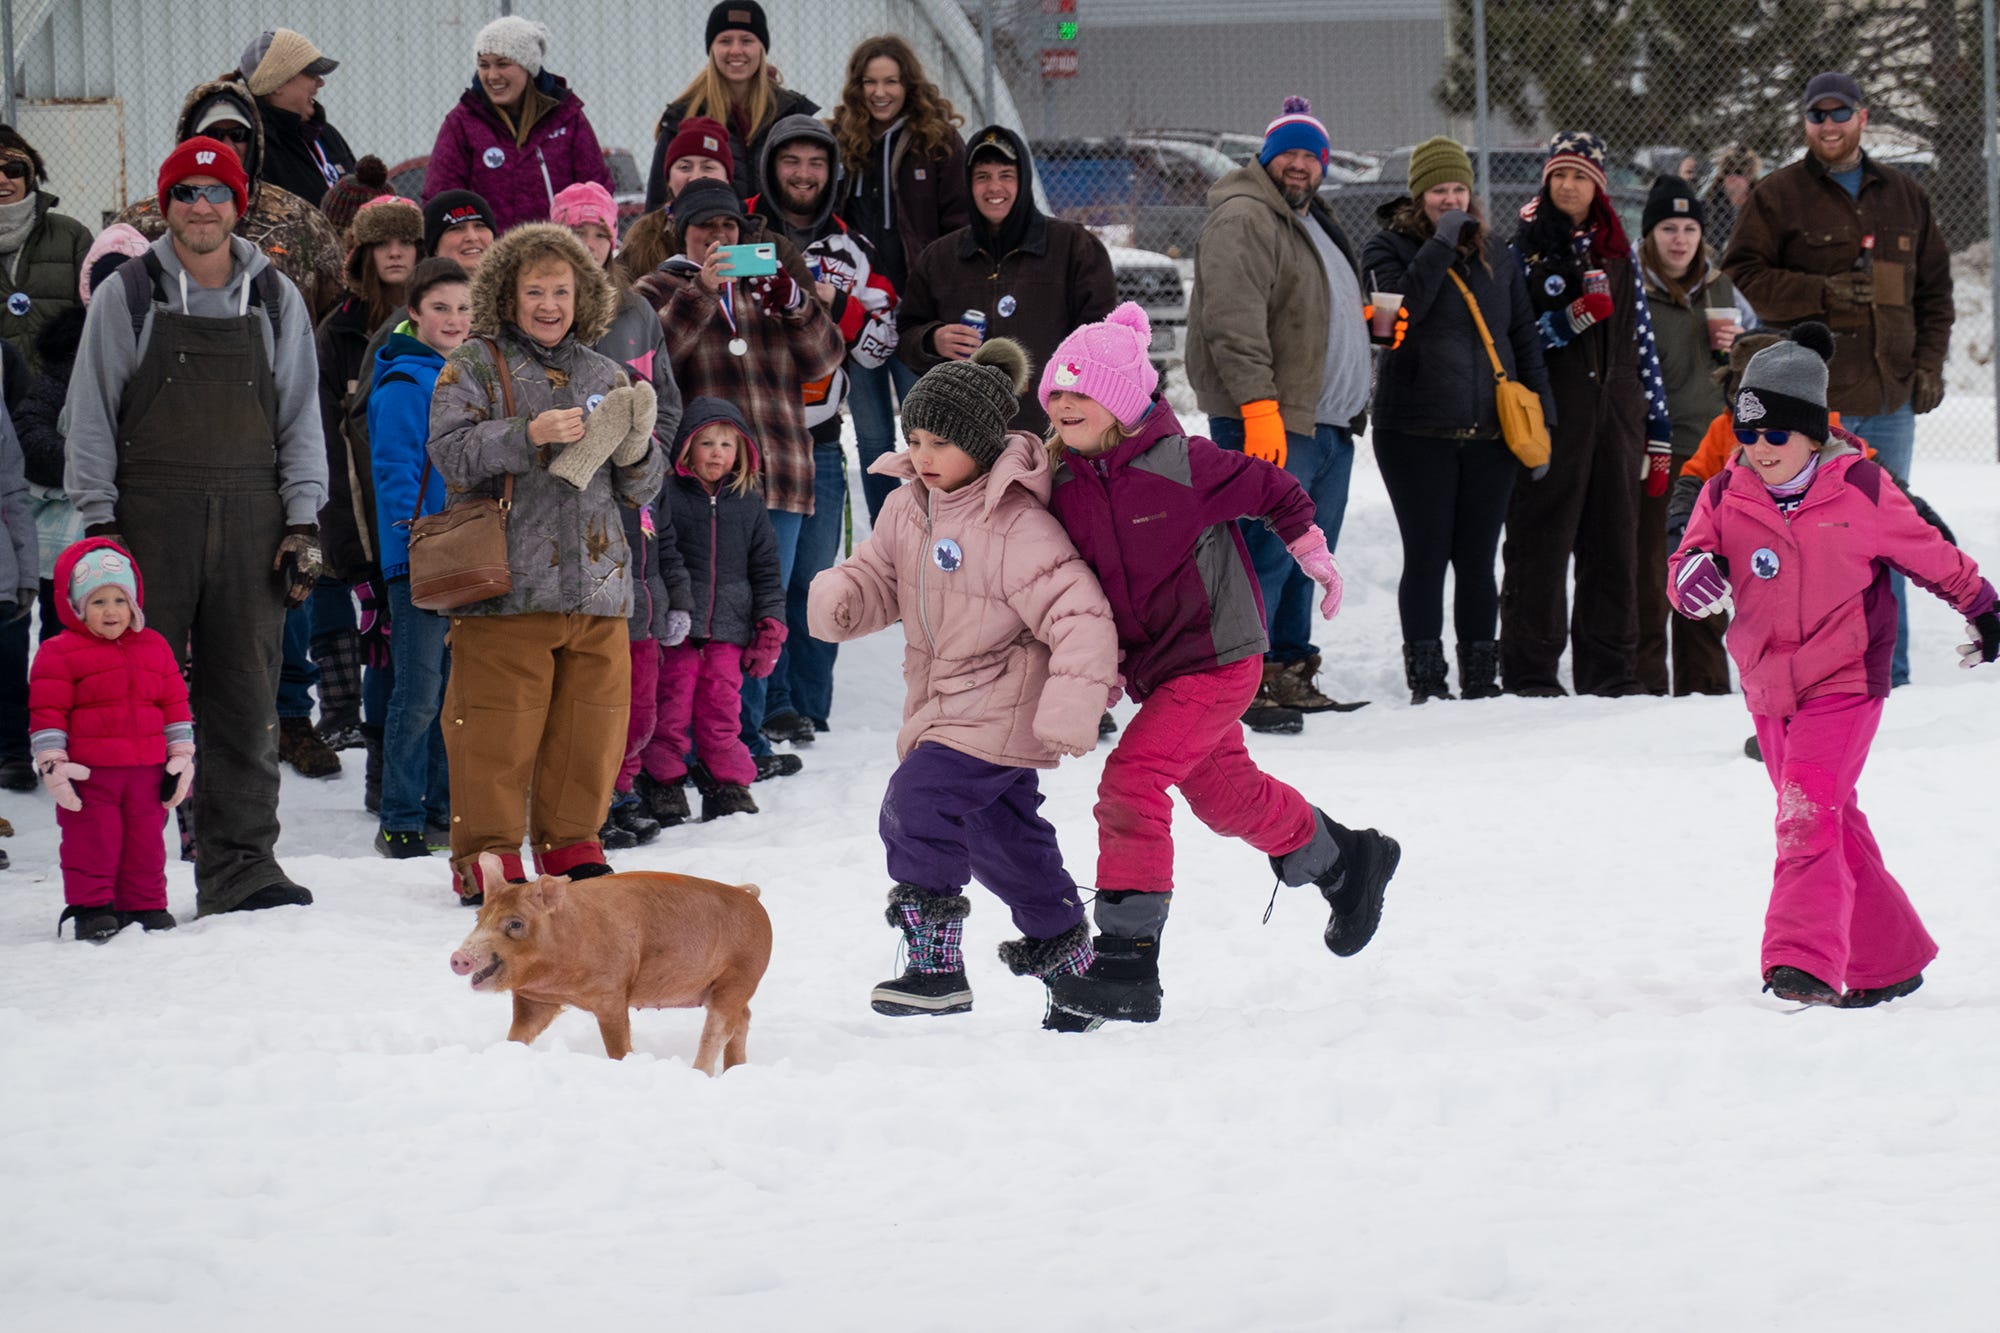 Three children chasing a piglet in the snow.